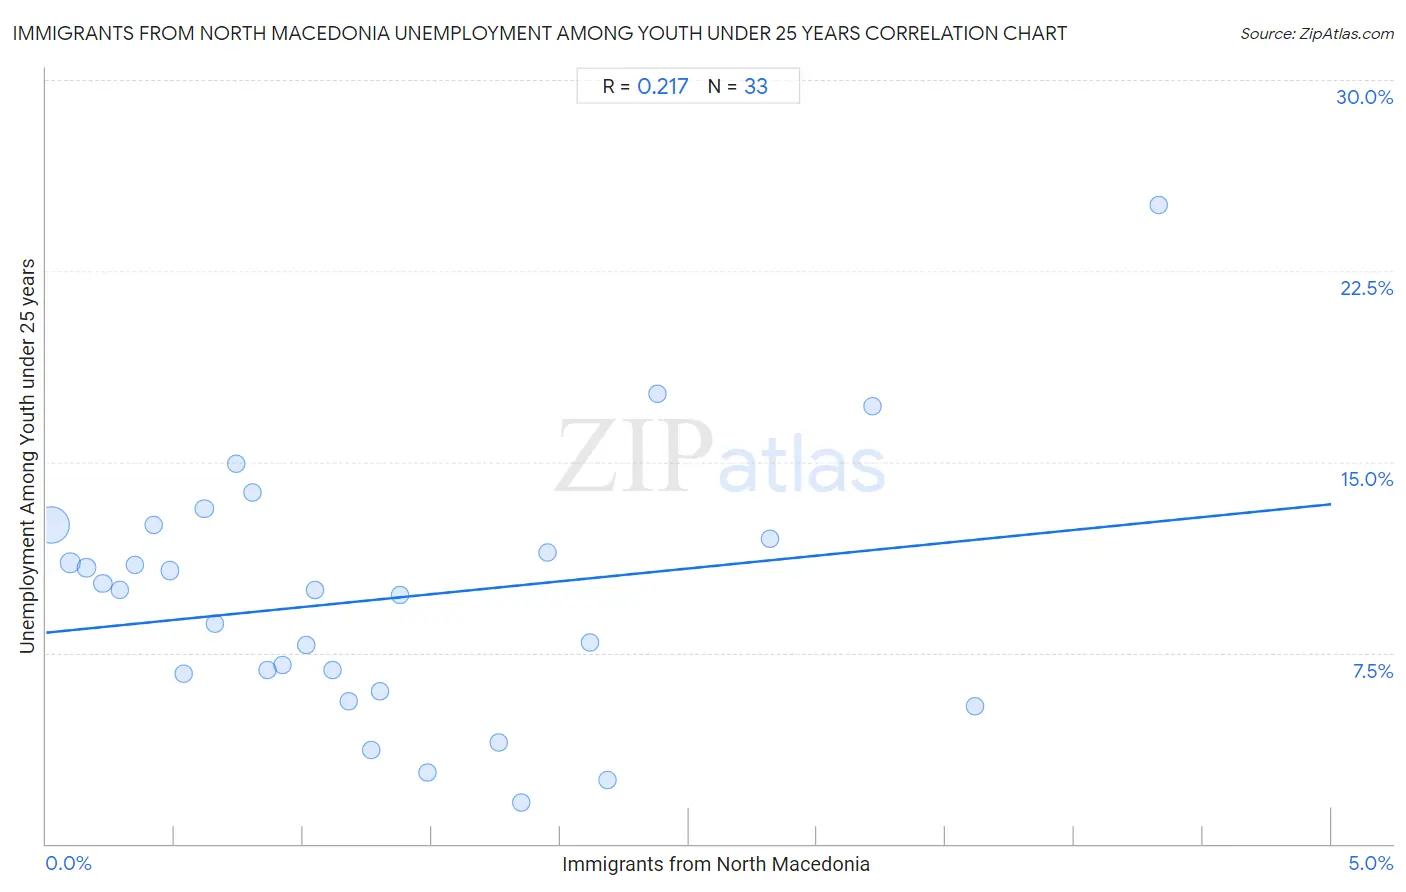 Immigrants from North Macedonia Unemployment Among Youth under 25 years